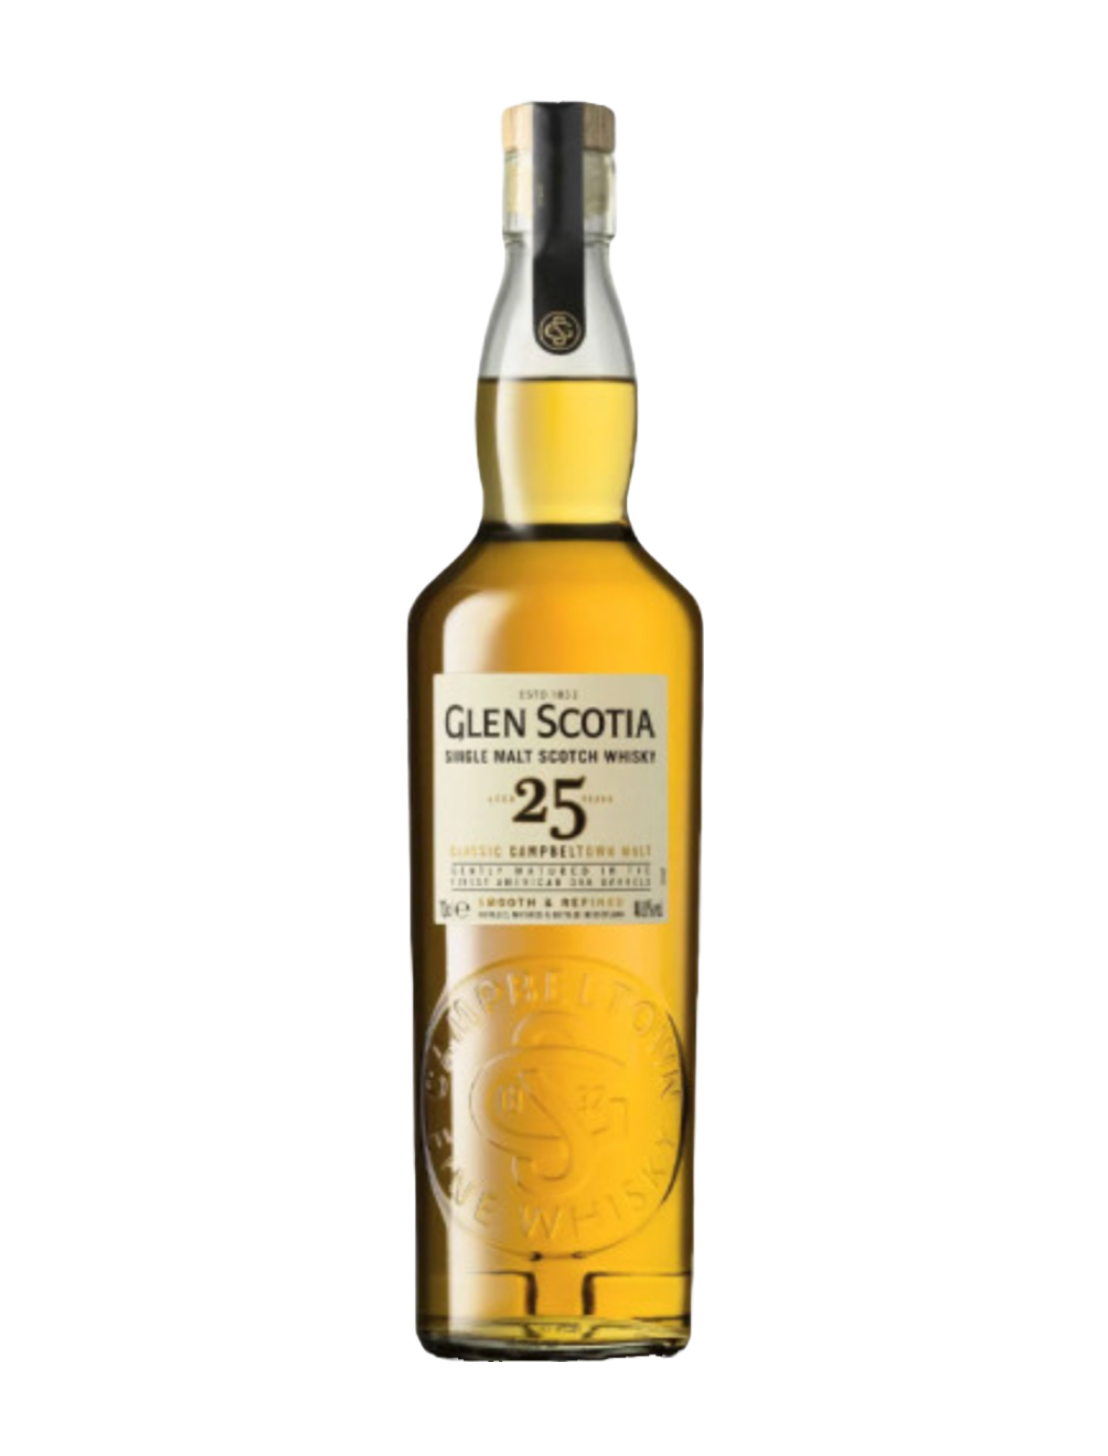 An elegant bottle of Glen Scotia 25 Year Old Single Malt Scotch in front of a plain white background